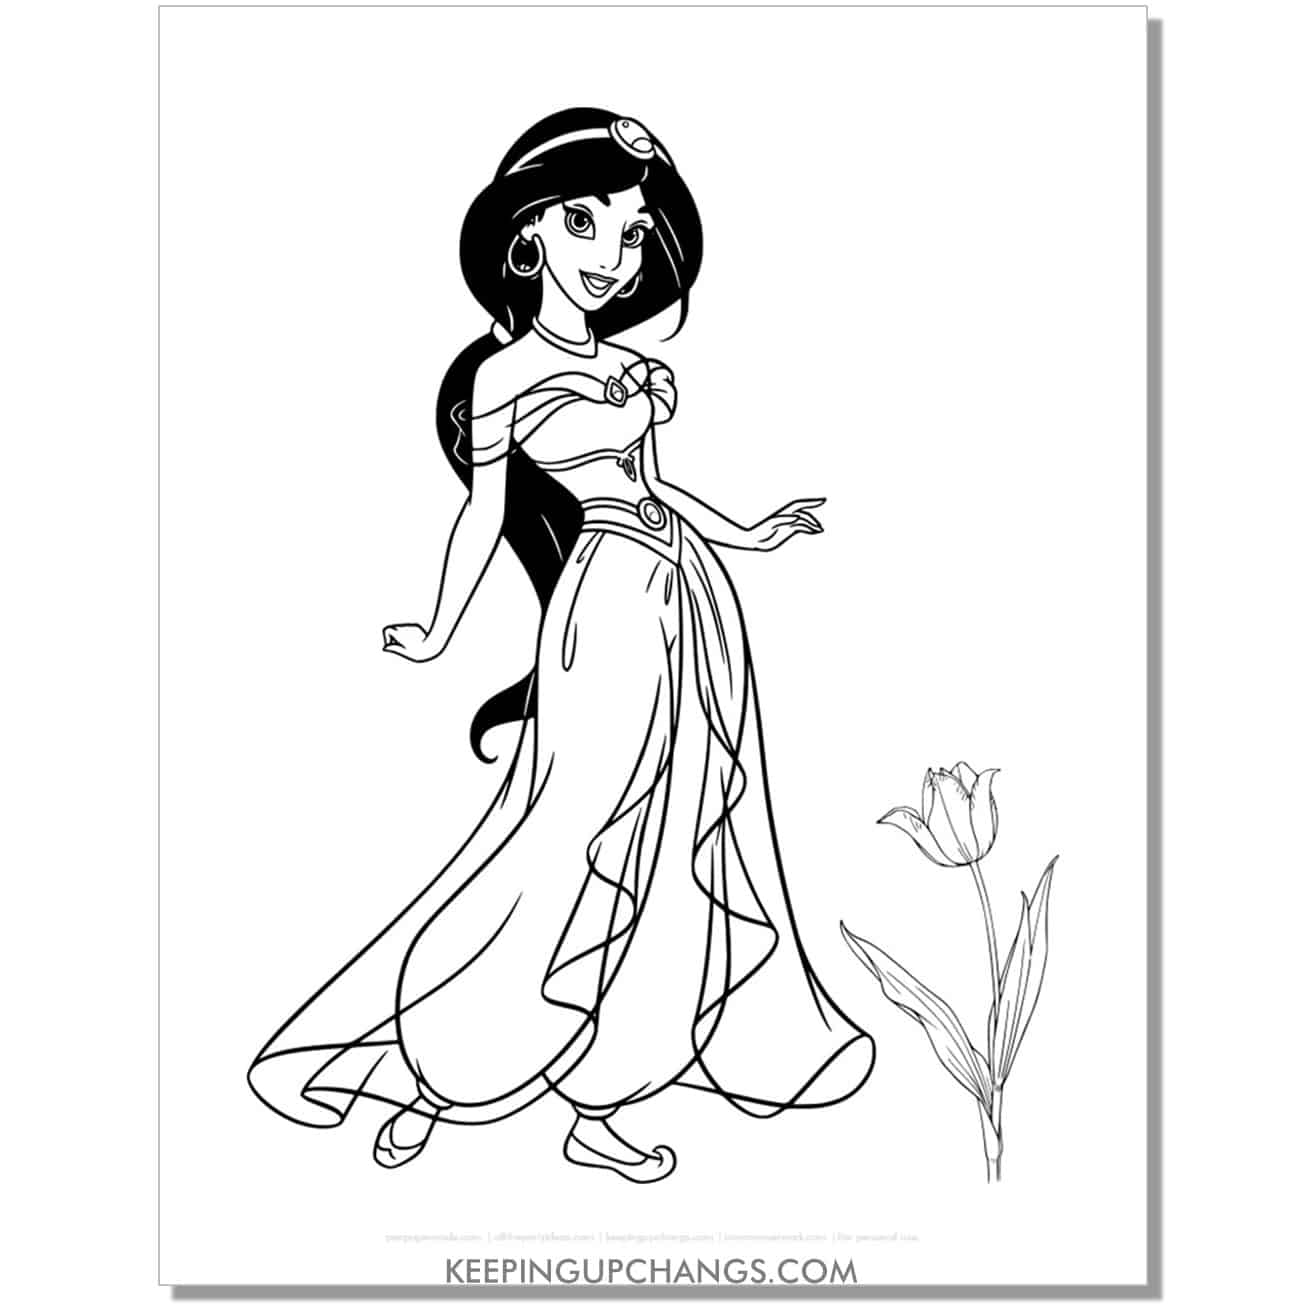 jasmine with lily flower coloring page, sheet.